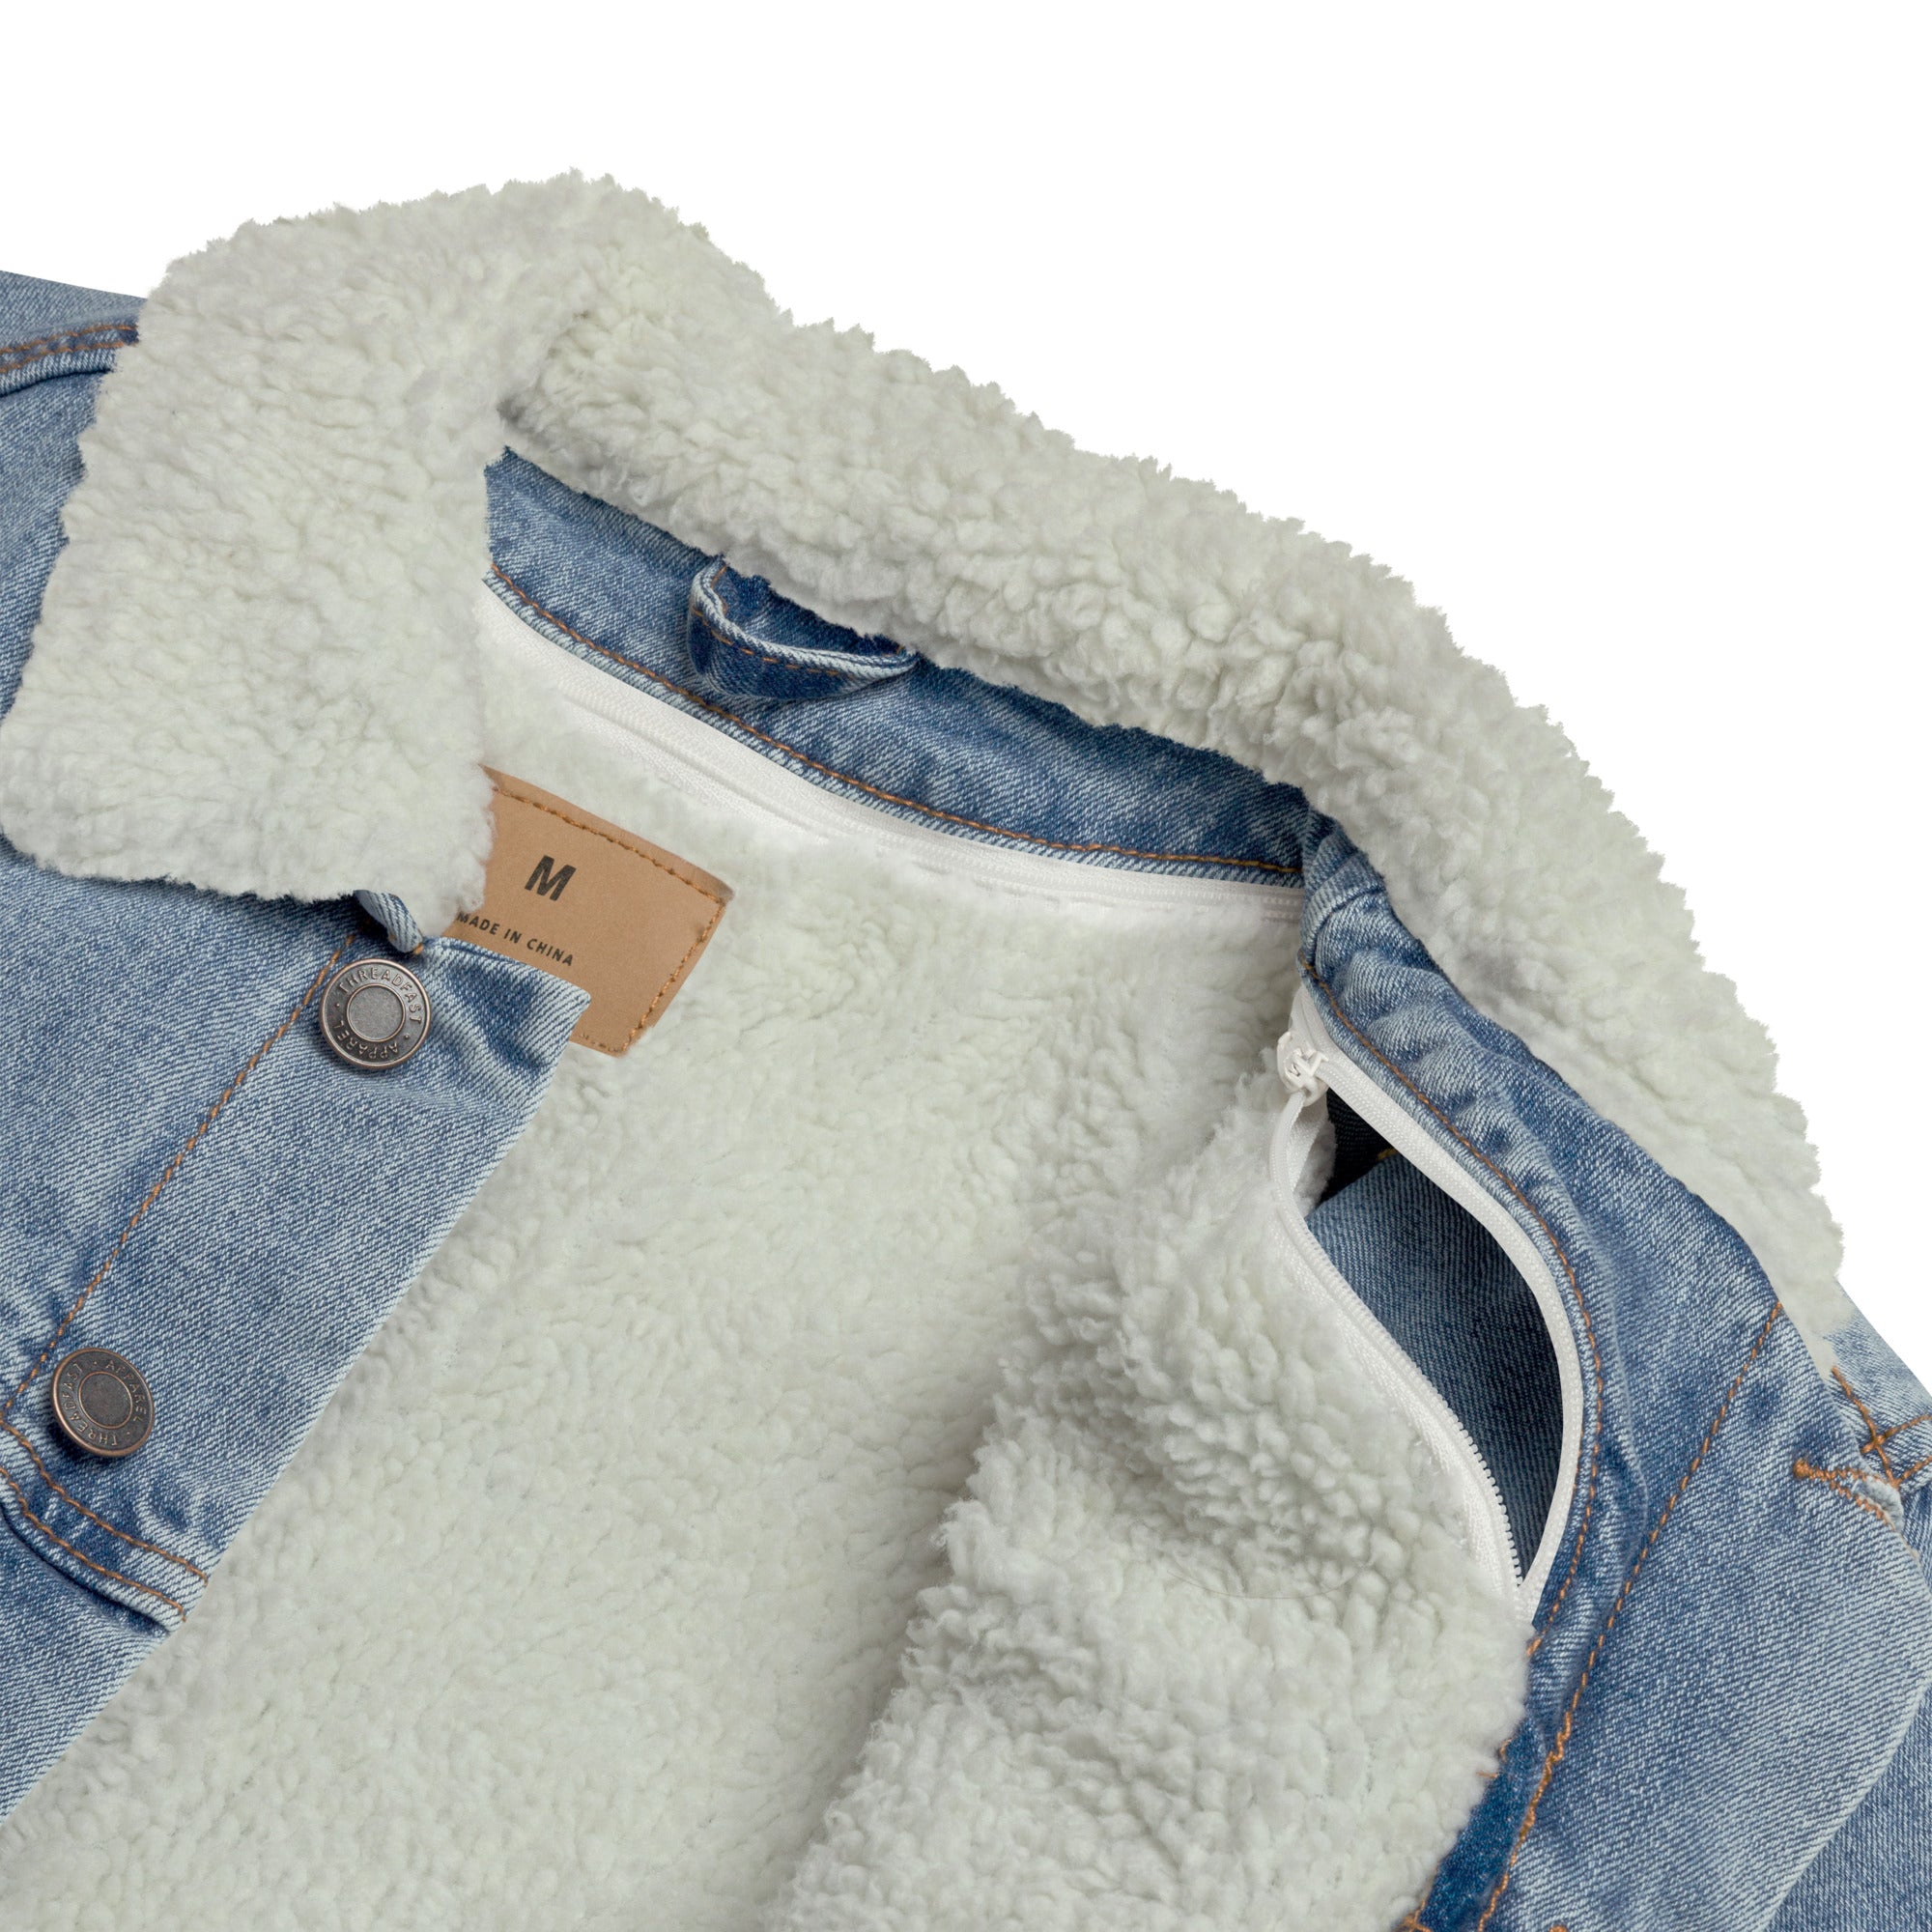 Riches Couture Denim Luxe Sherpa jacket